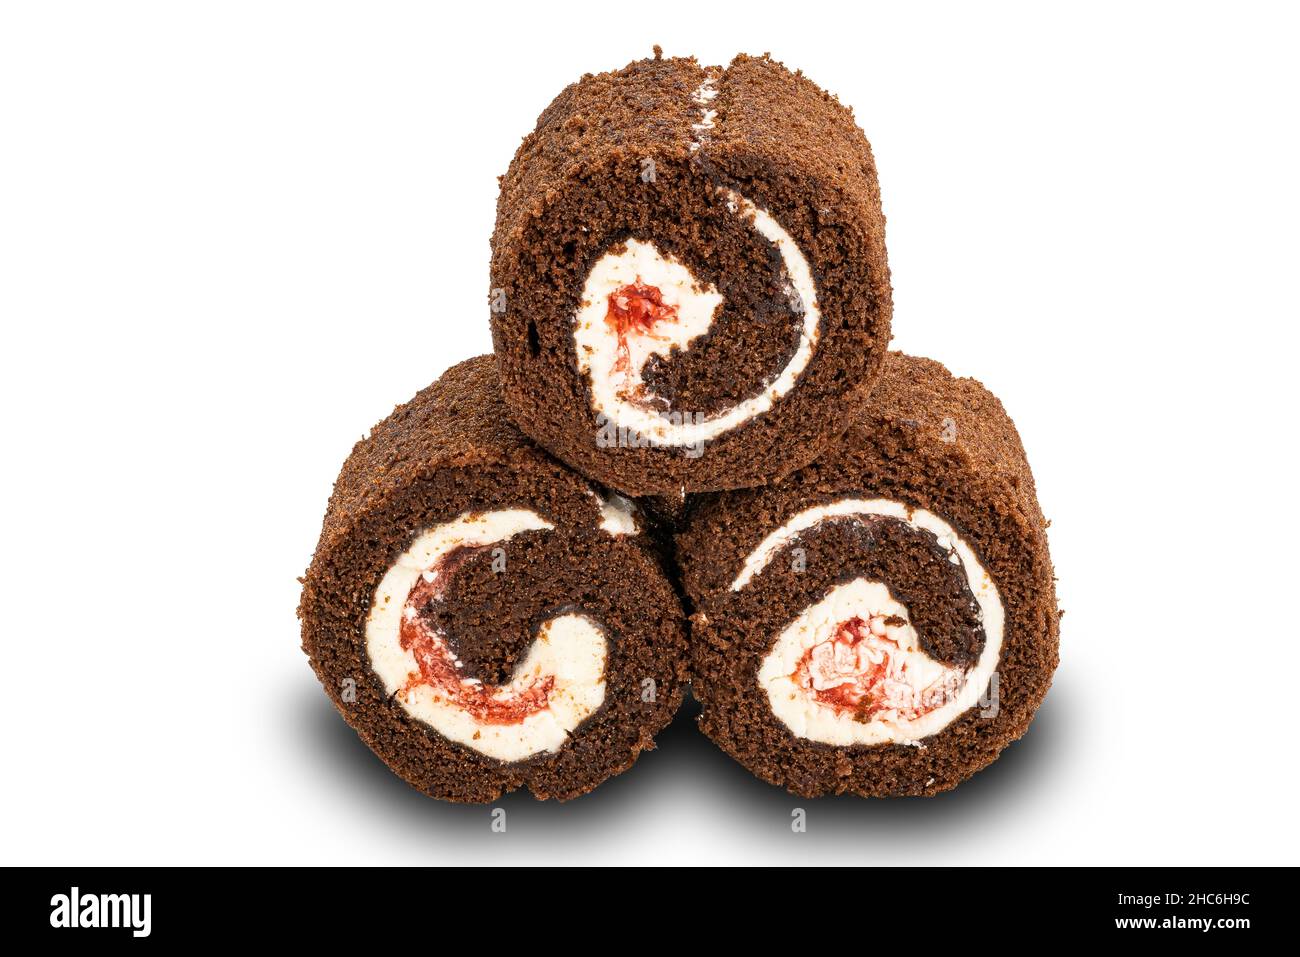 Pile of homemade chocolate Mini Black Forest Cake Roll filled with white cream on white background with clipping path. Stock Photo